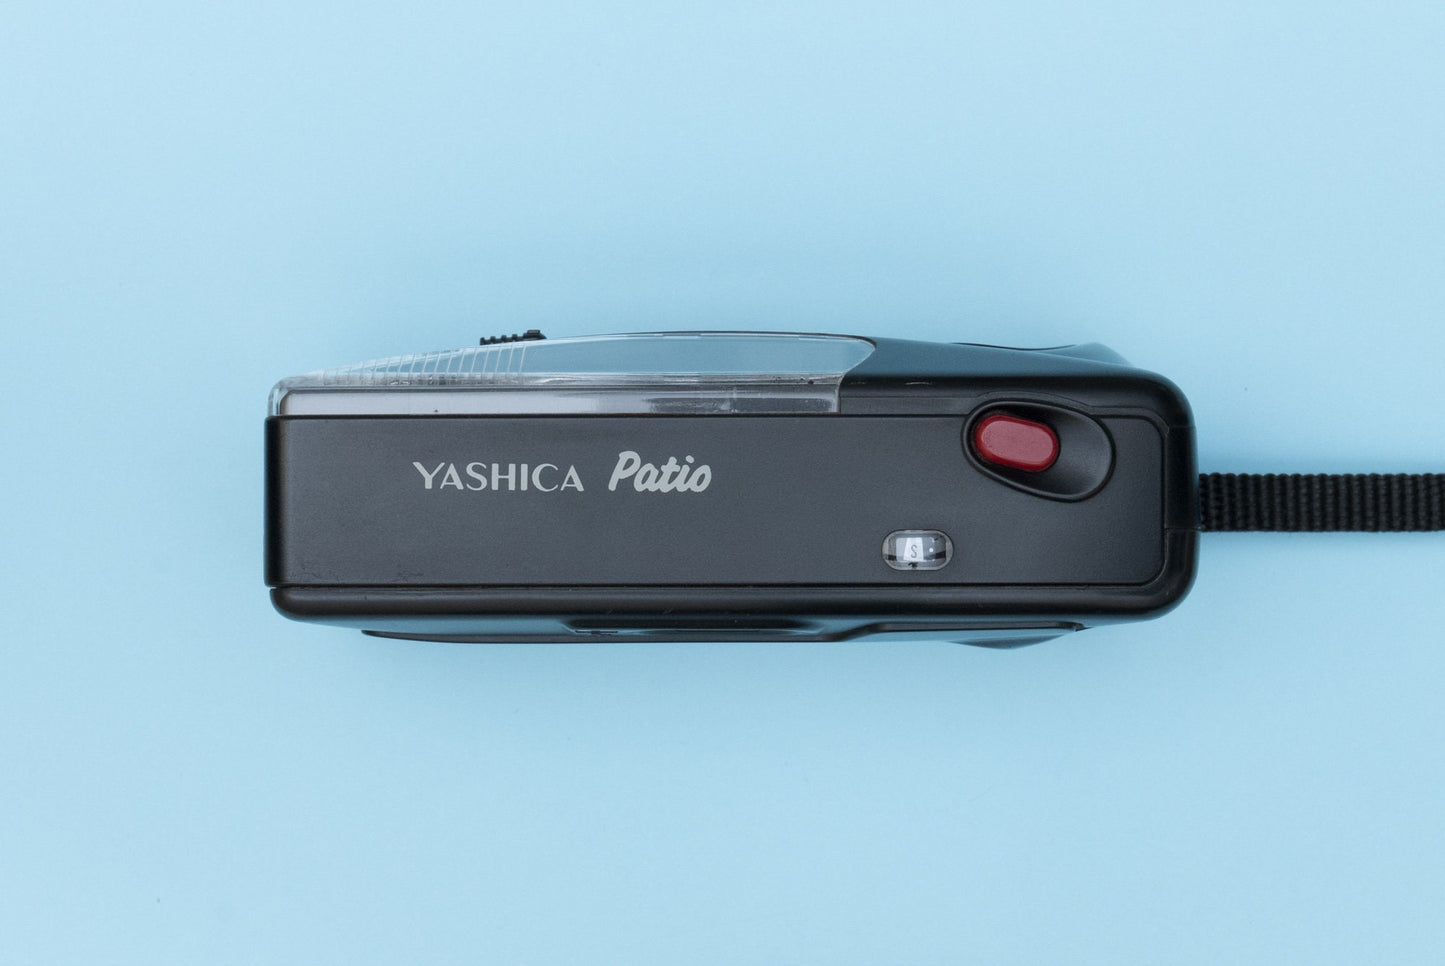 Yashica Patio Point and Shoot 35mm Compact Film Camera